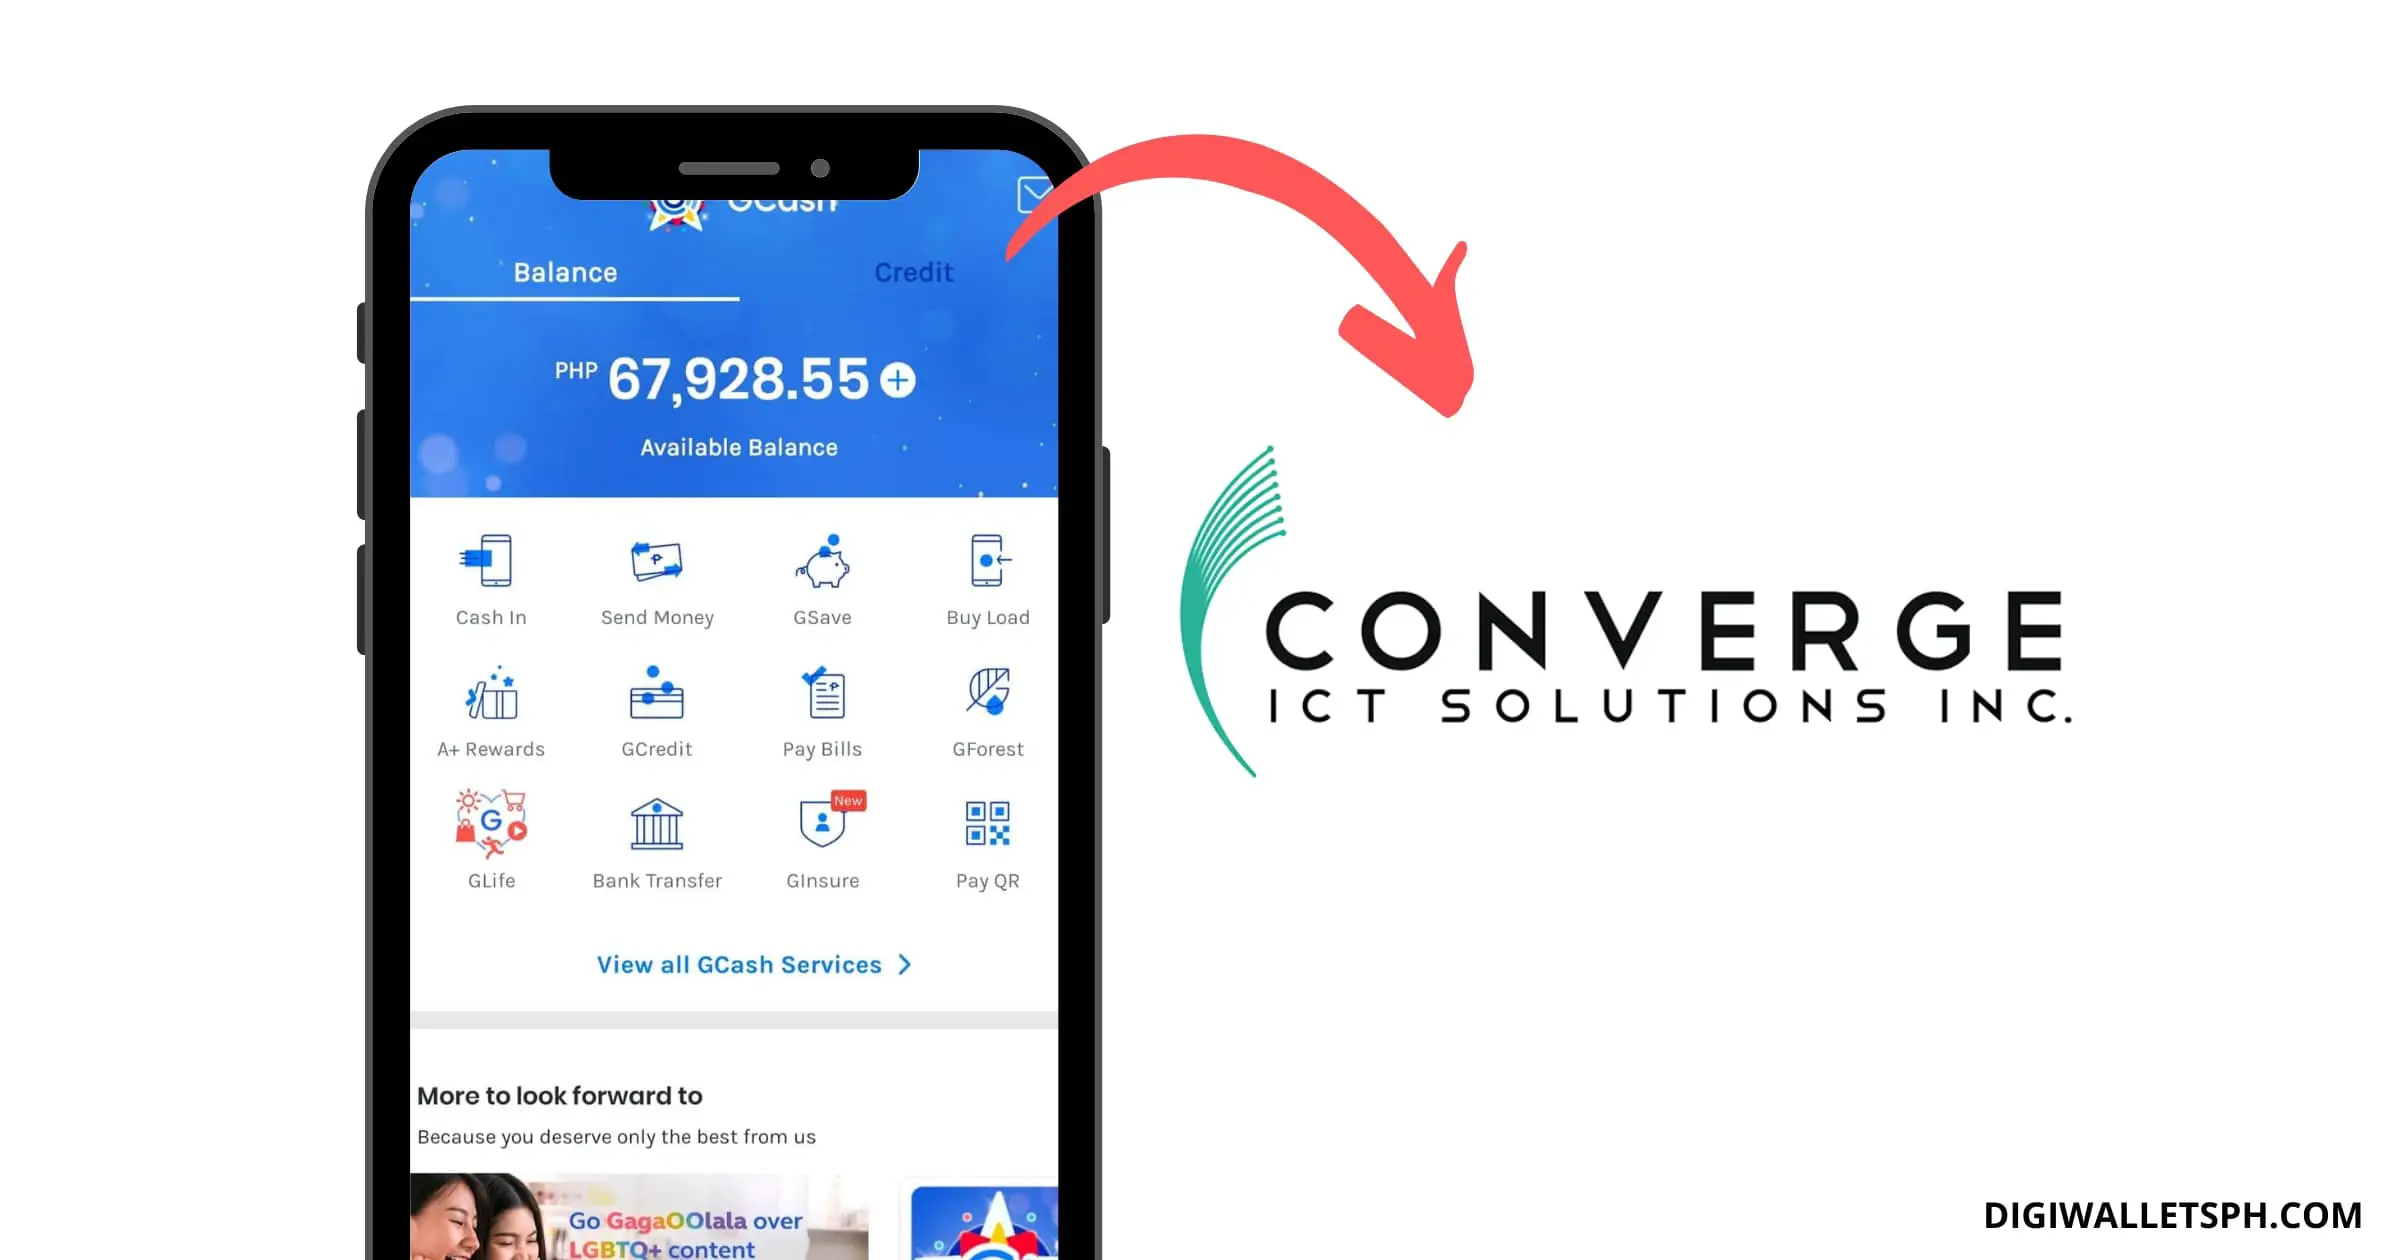 How to pay Converge using GCash